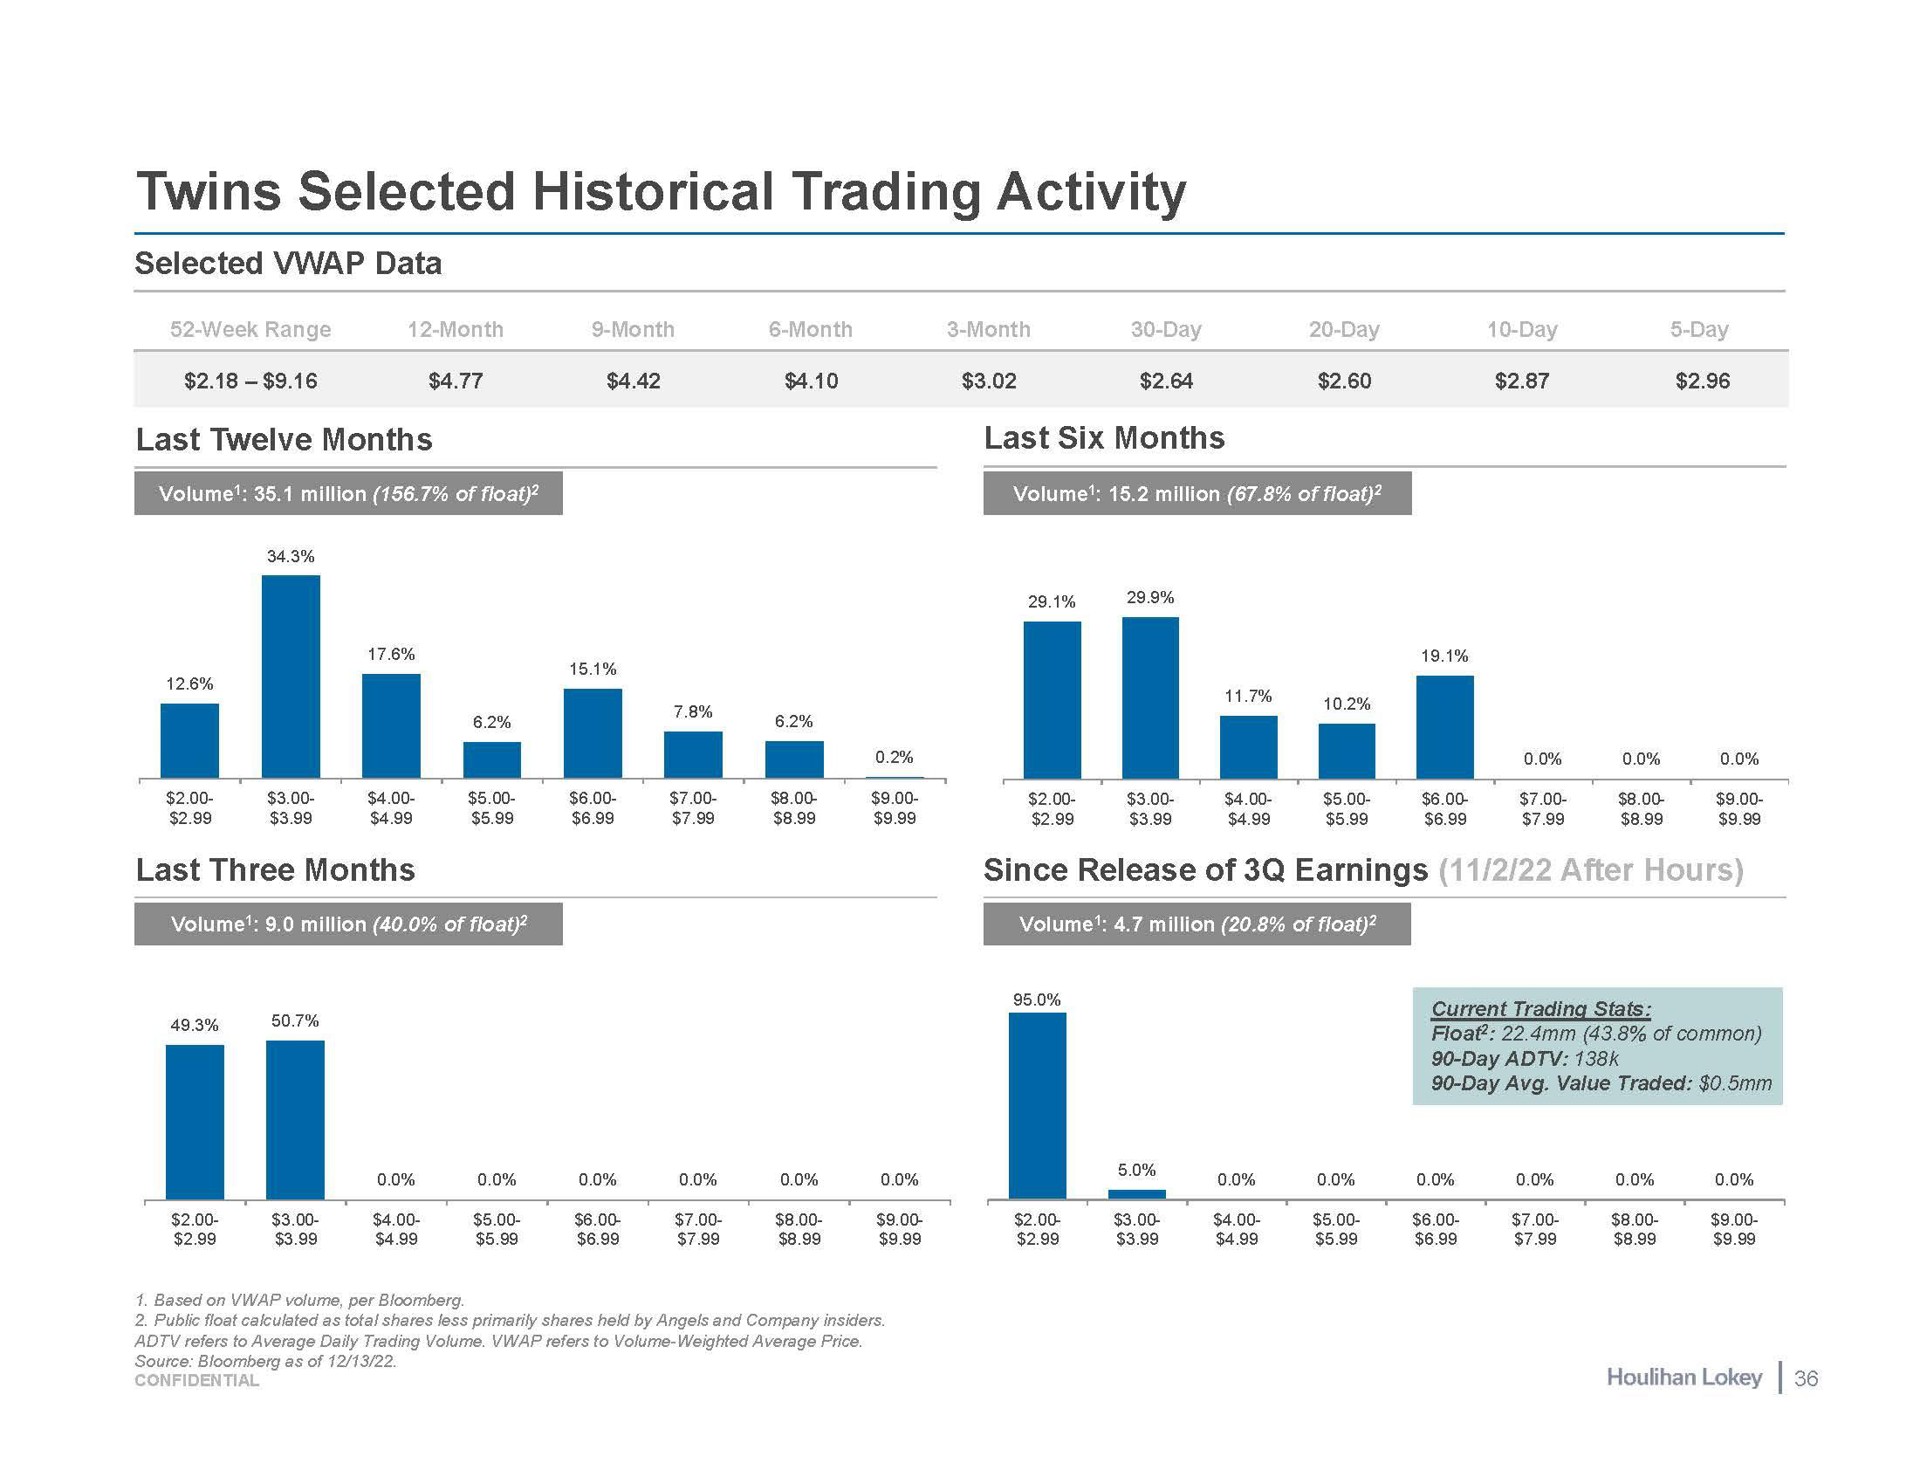 twins selected historical trading activity selected data last twelve months last six months last three months since release of earnings current trading | Houlihan Lokey